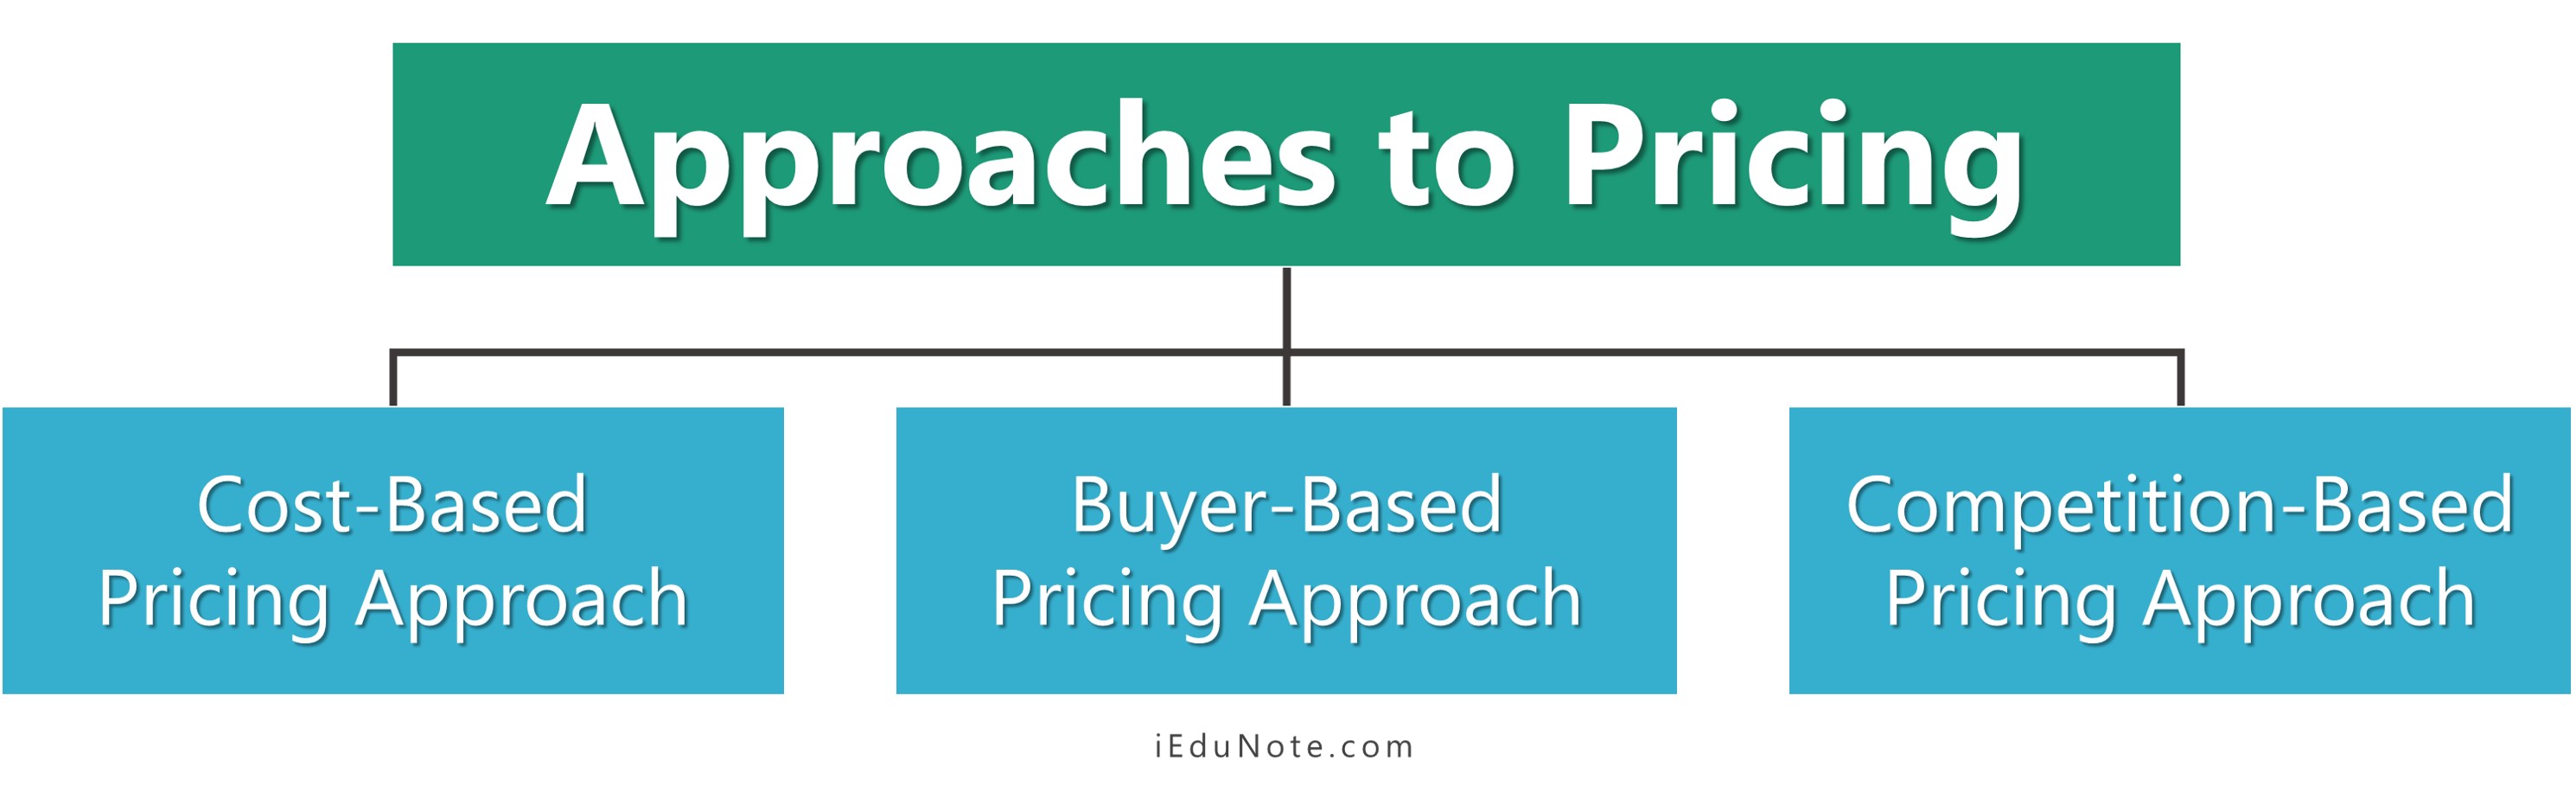 Pricing method. Principles of pricing. Product pricing in International Business pics.